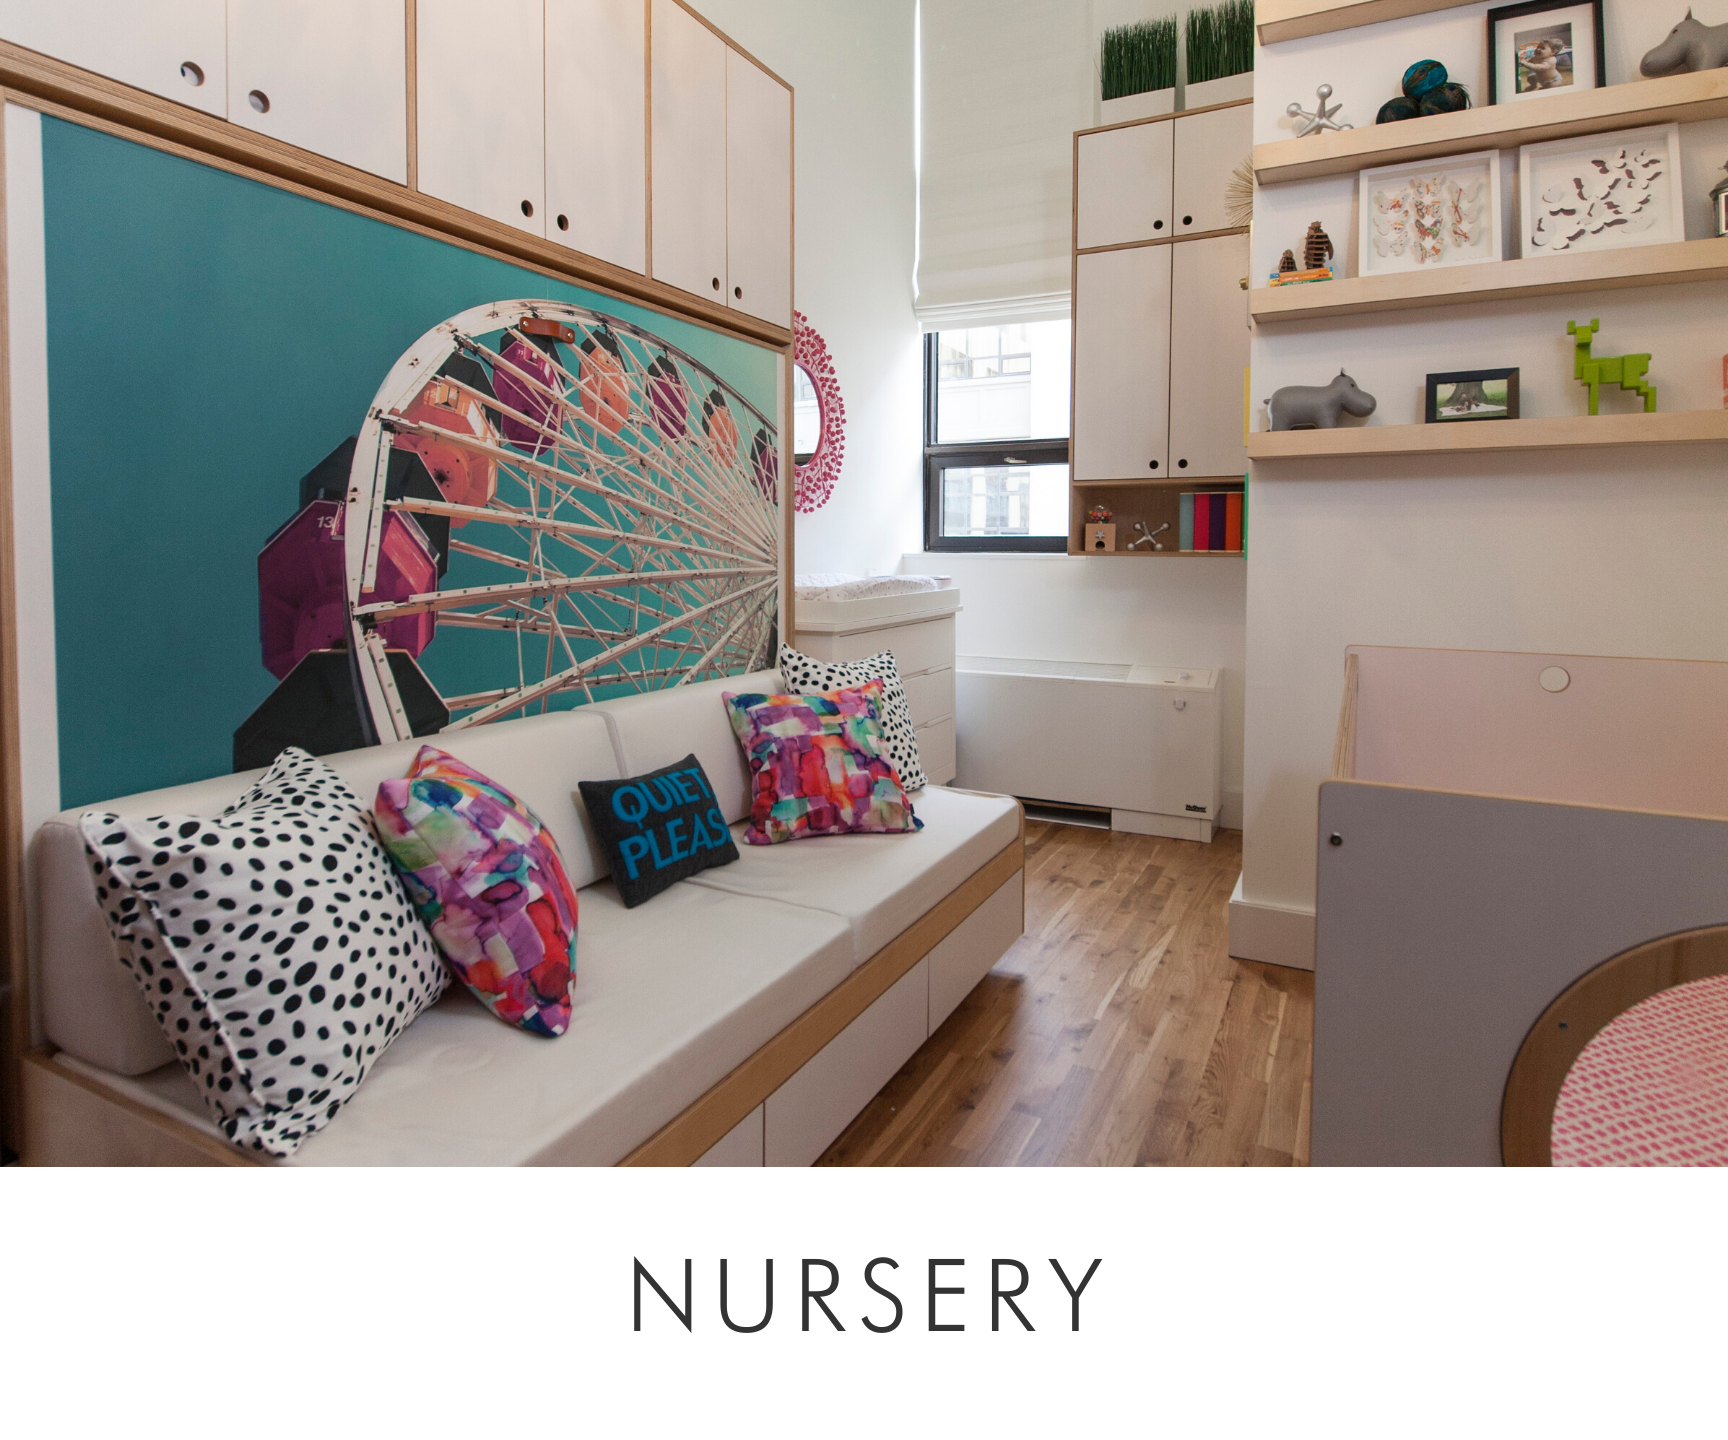 Nursery with a bench seat, colorful cushions, whimsical wall art, and open shelving.